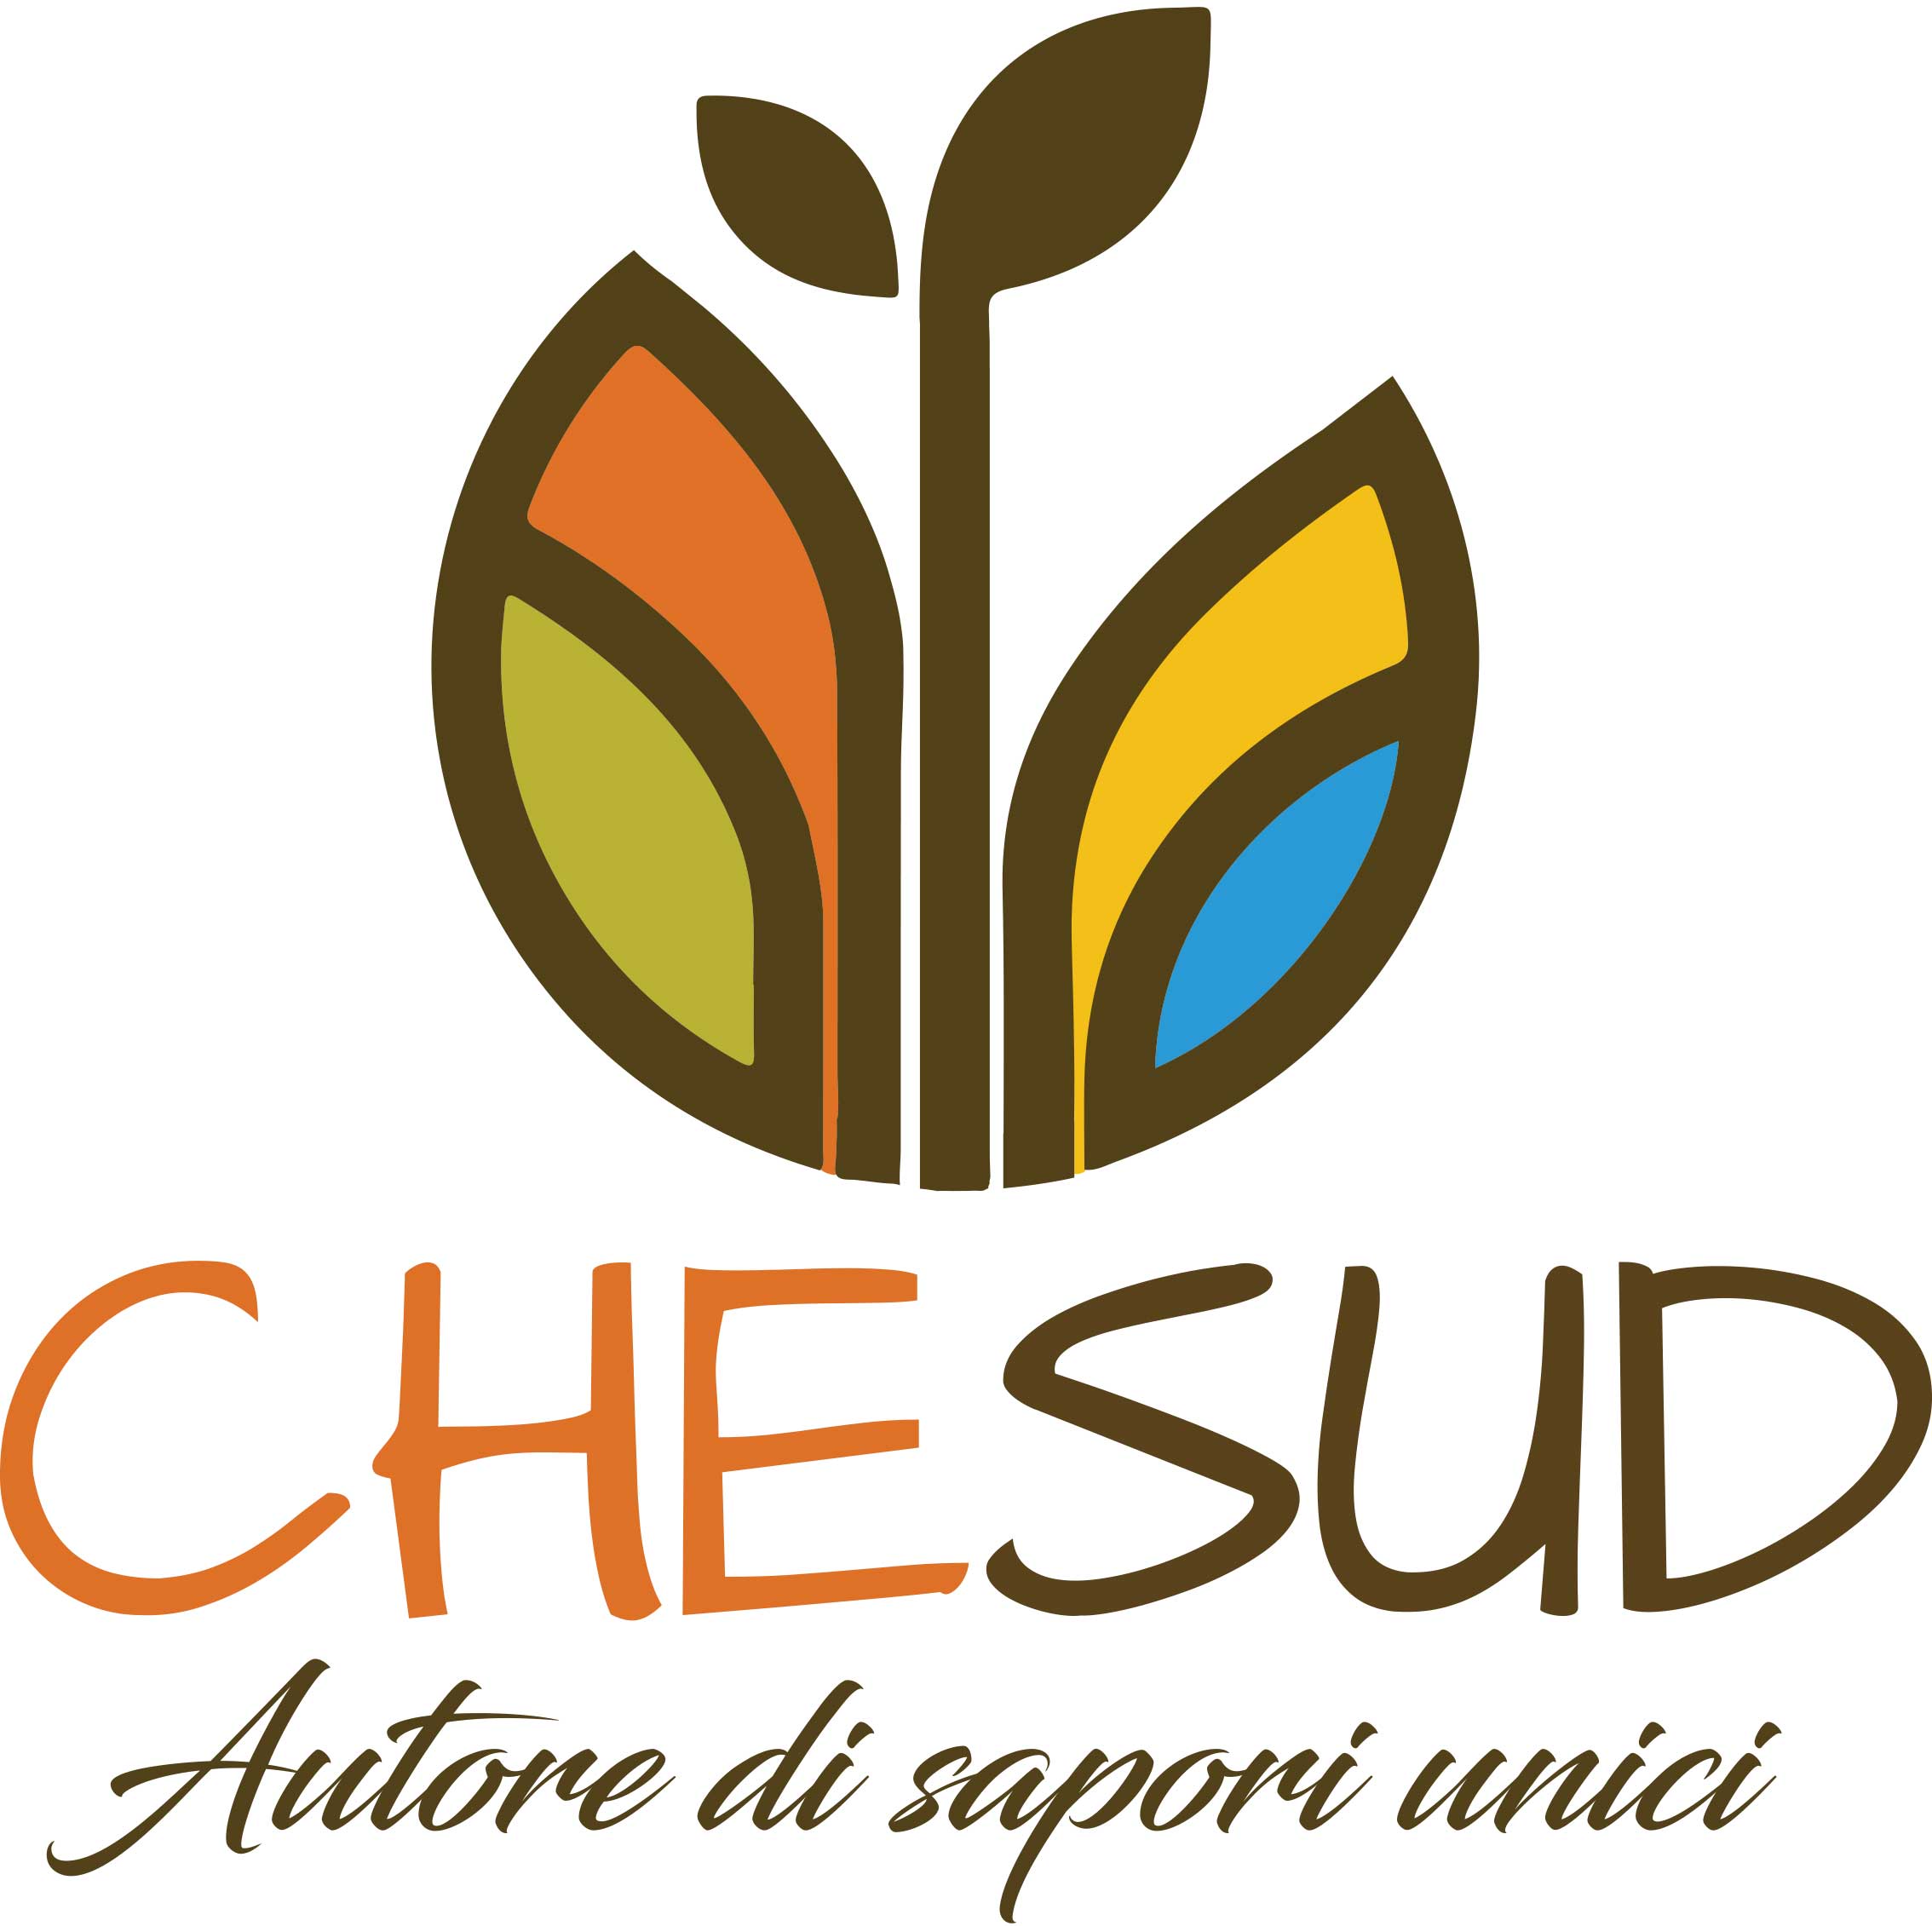 CheSud